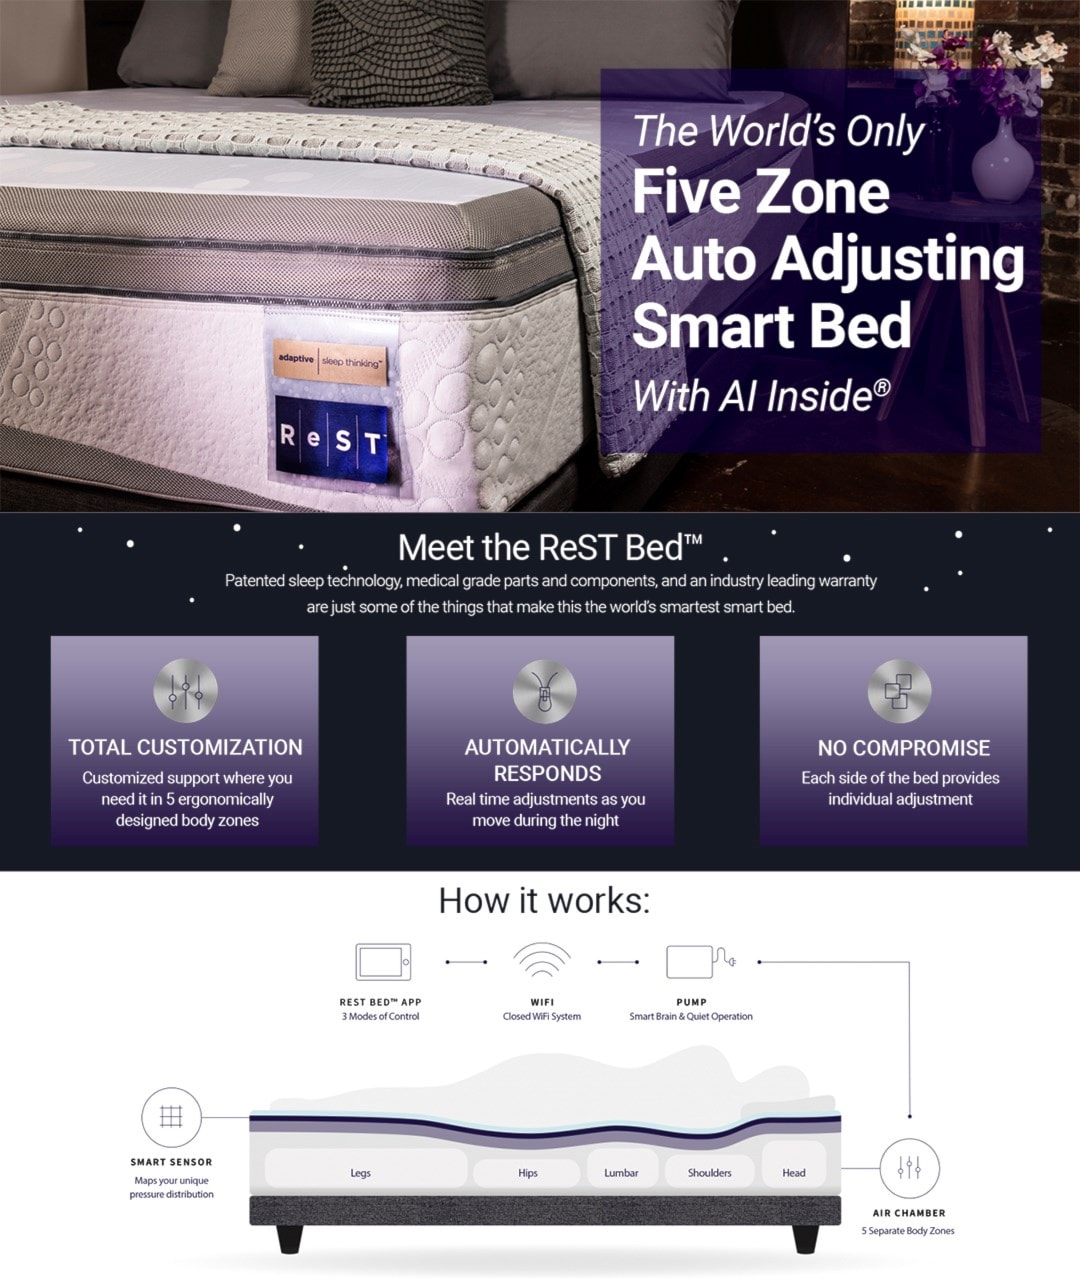 The World's Only Five Zone Auto Adjusting Smart Bed with AI Inside | Meet the ReST Bed.